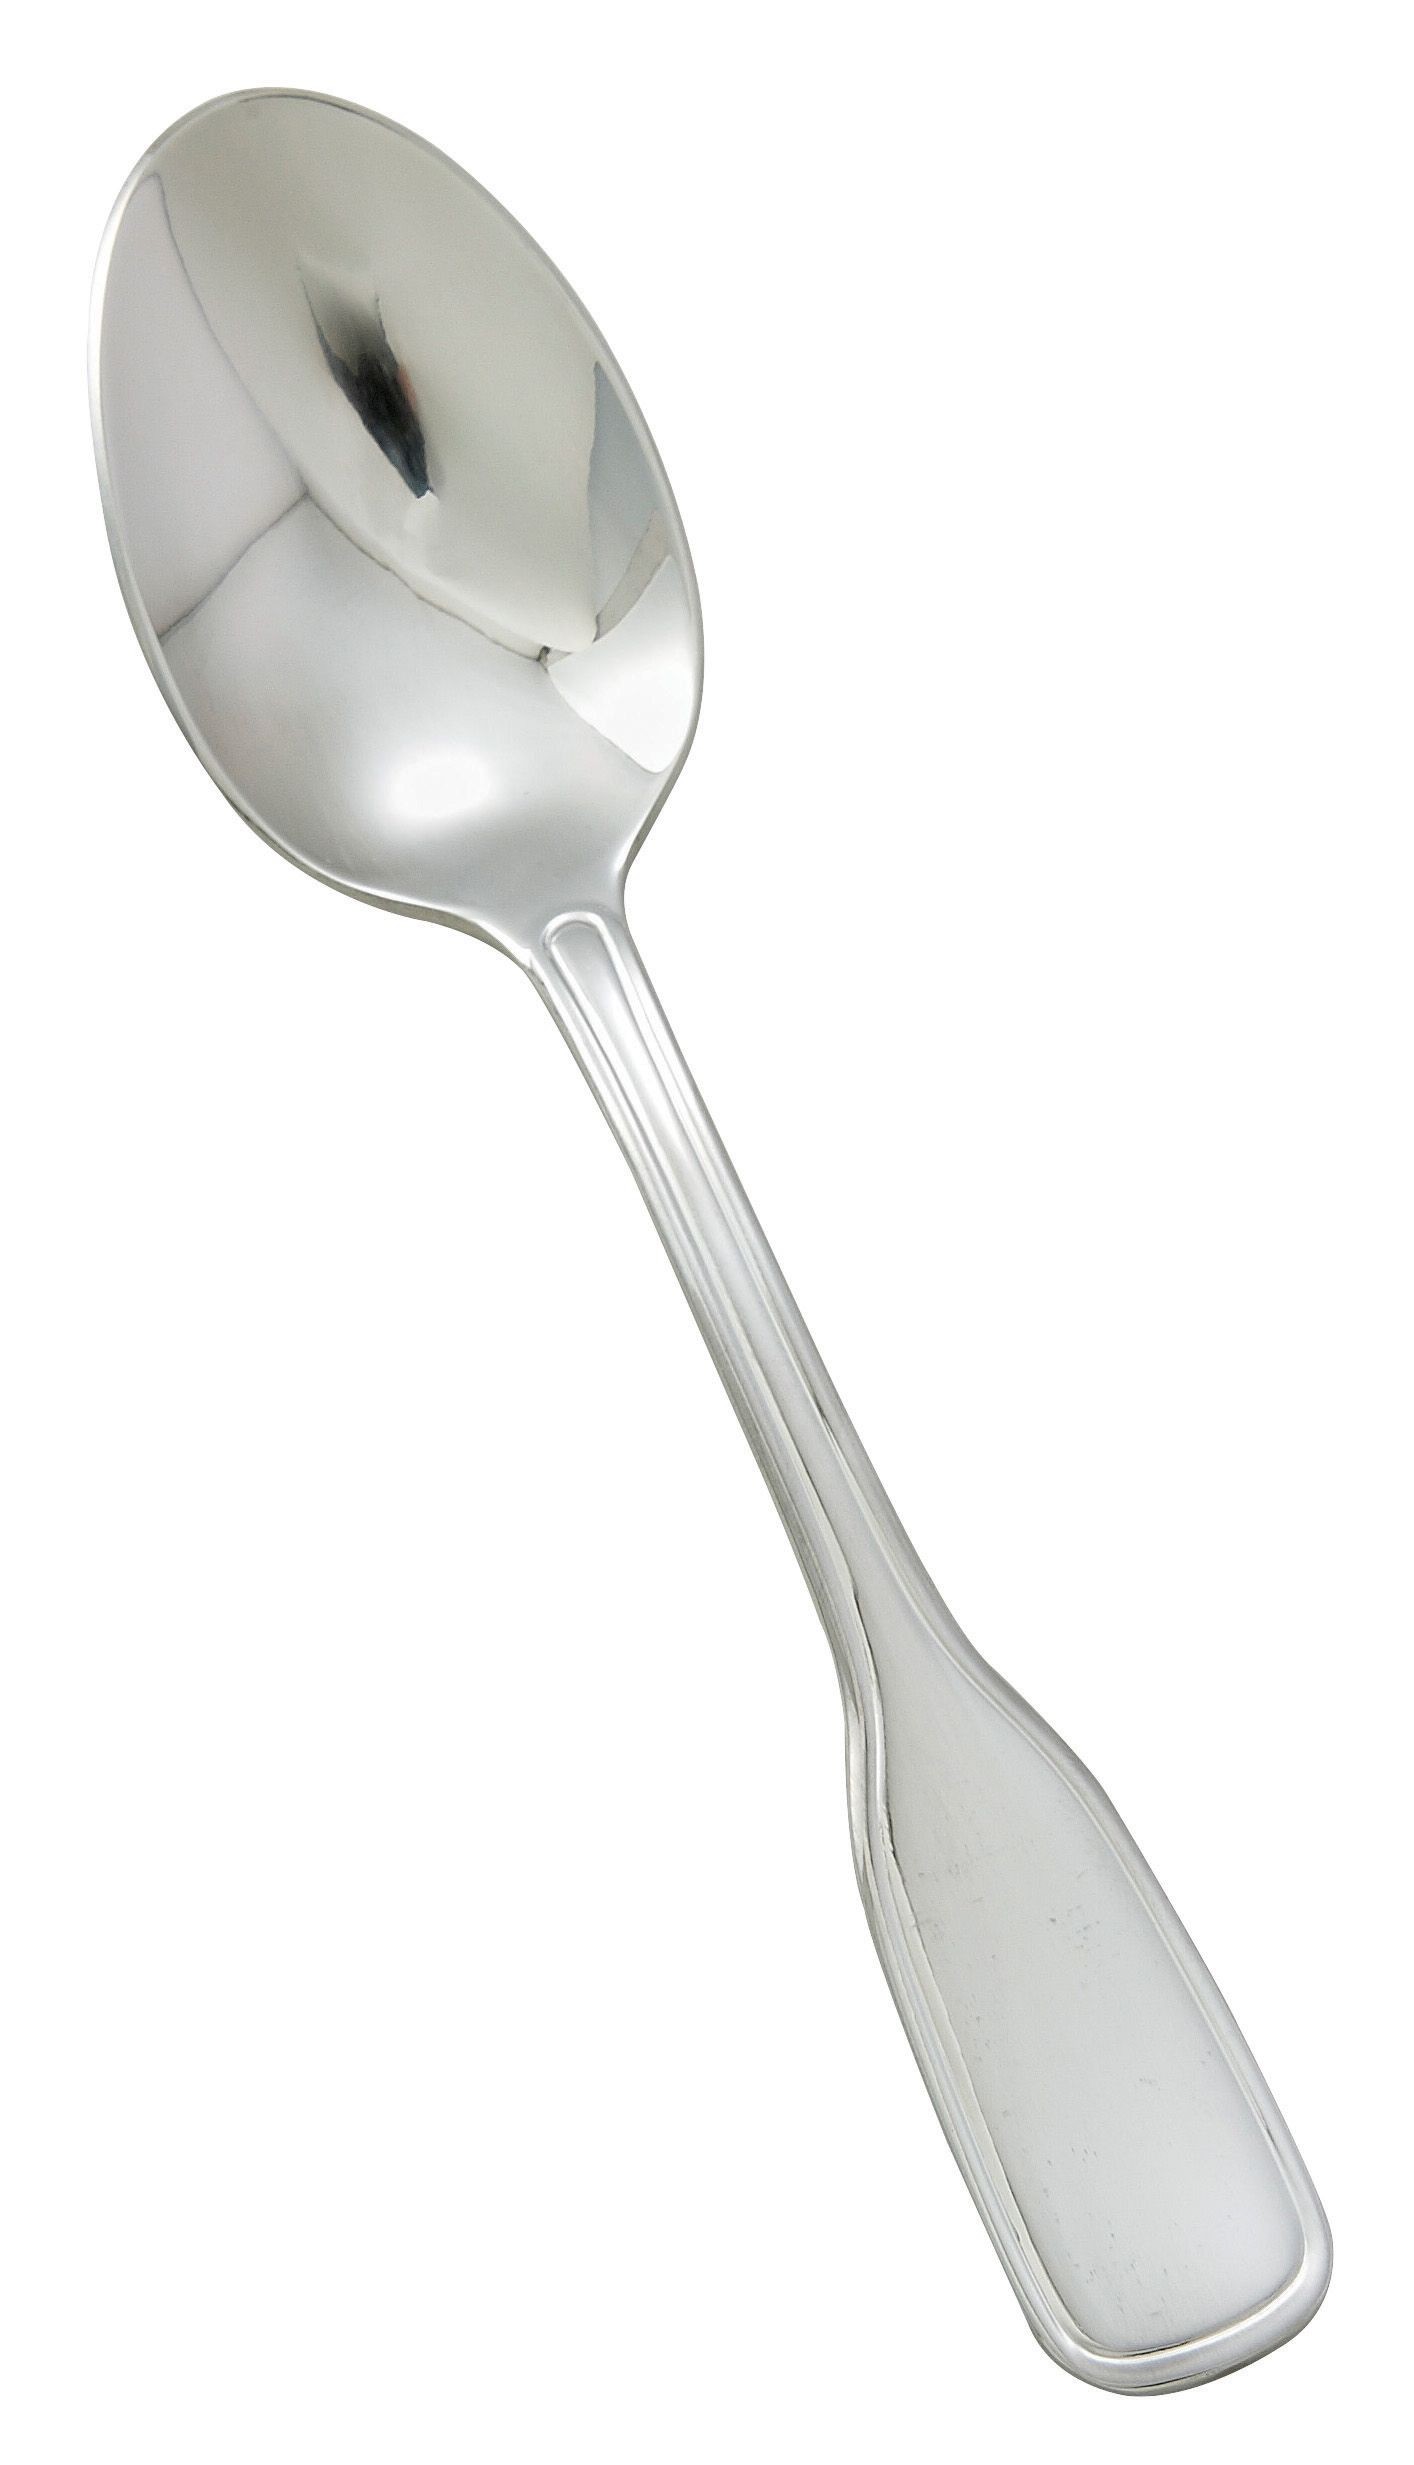 Winco 0033-01 Oxford Extra Heavy Stainless Steel Teaspoon (12/Pack)